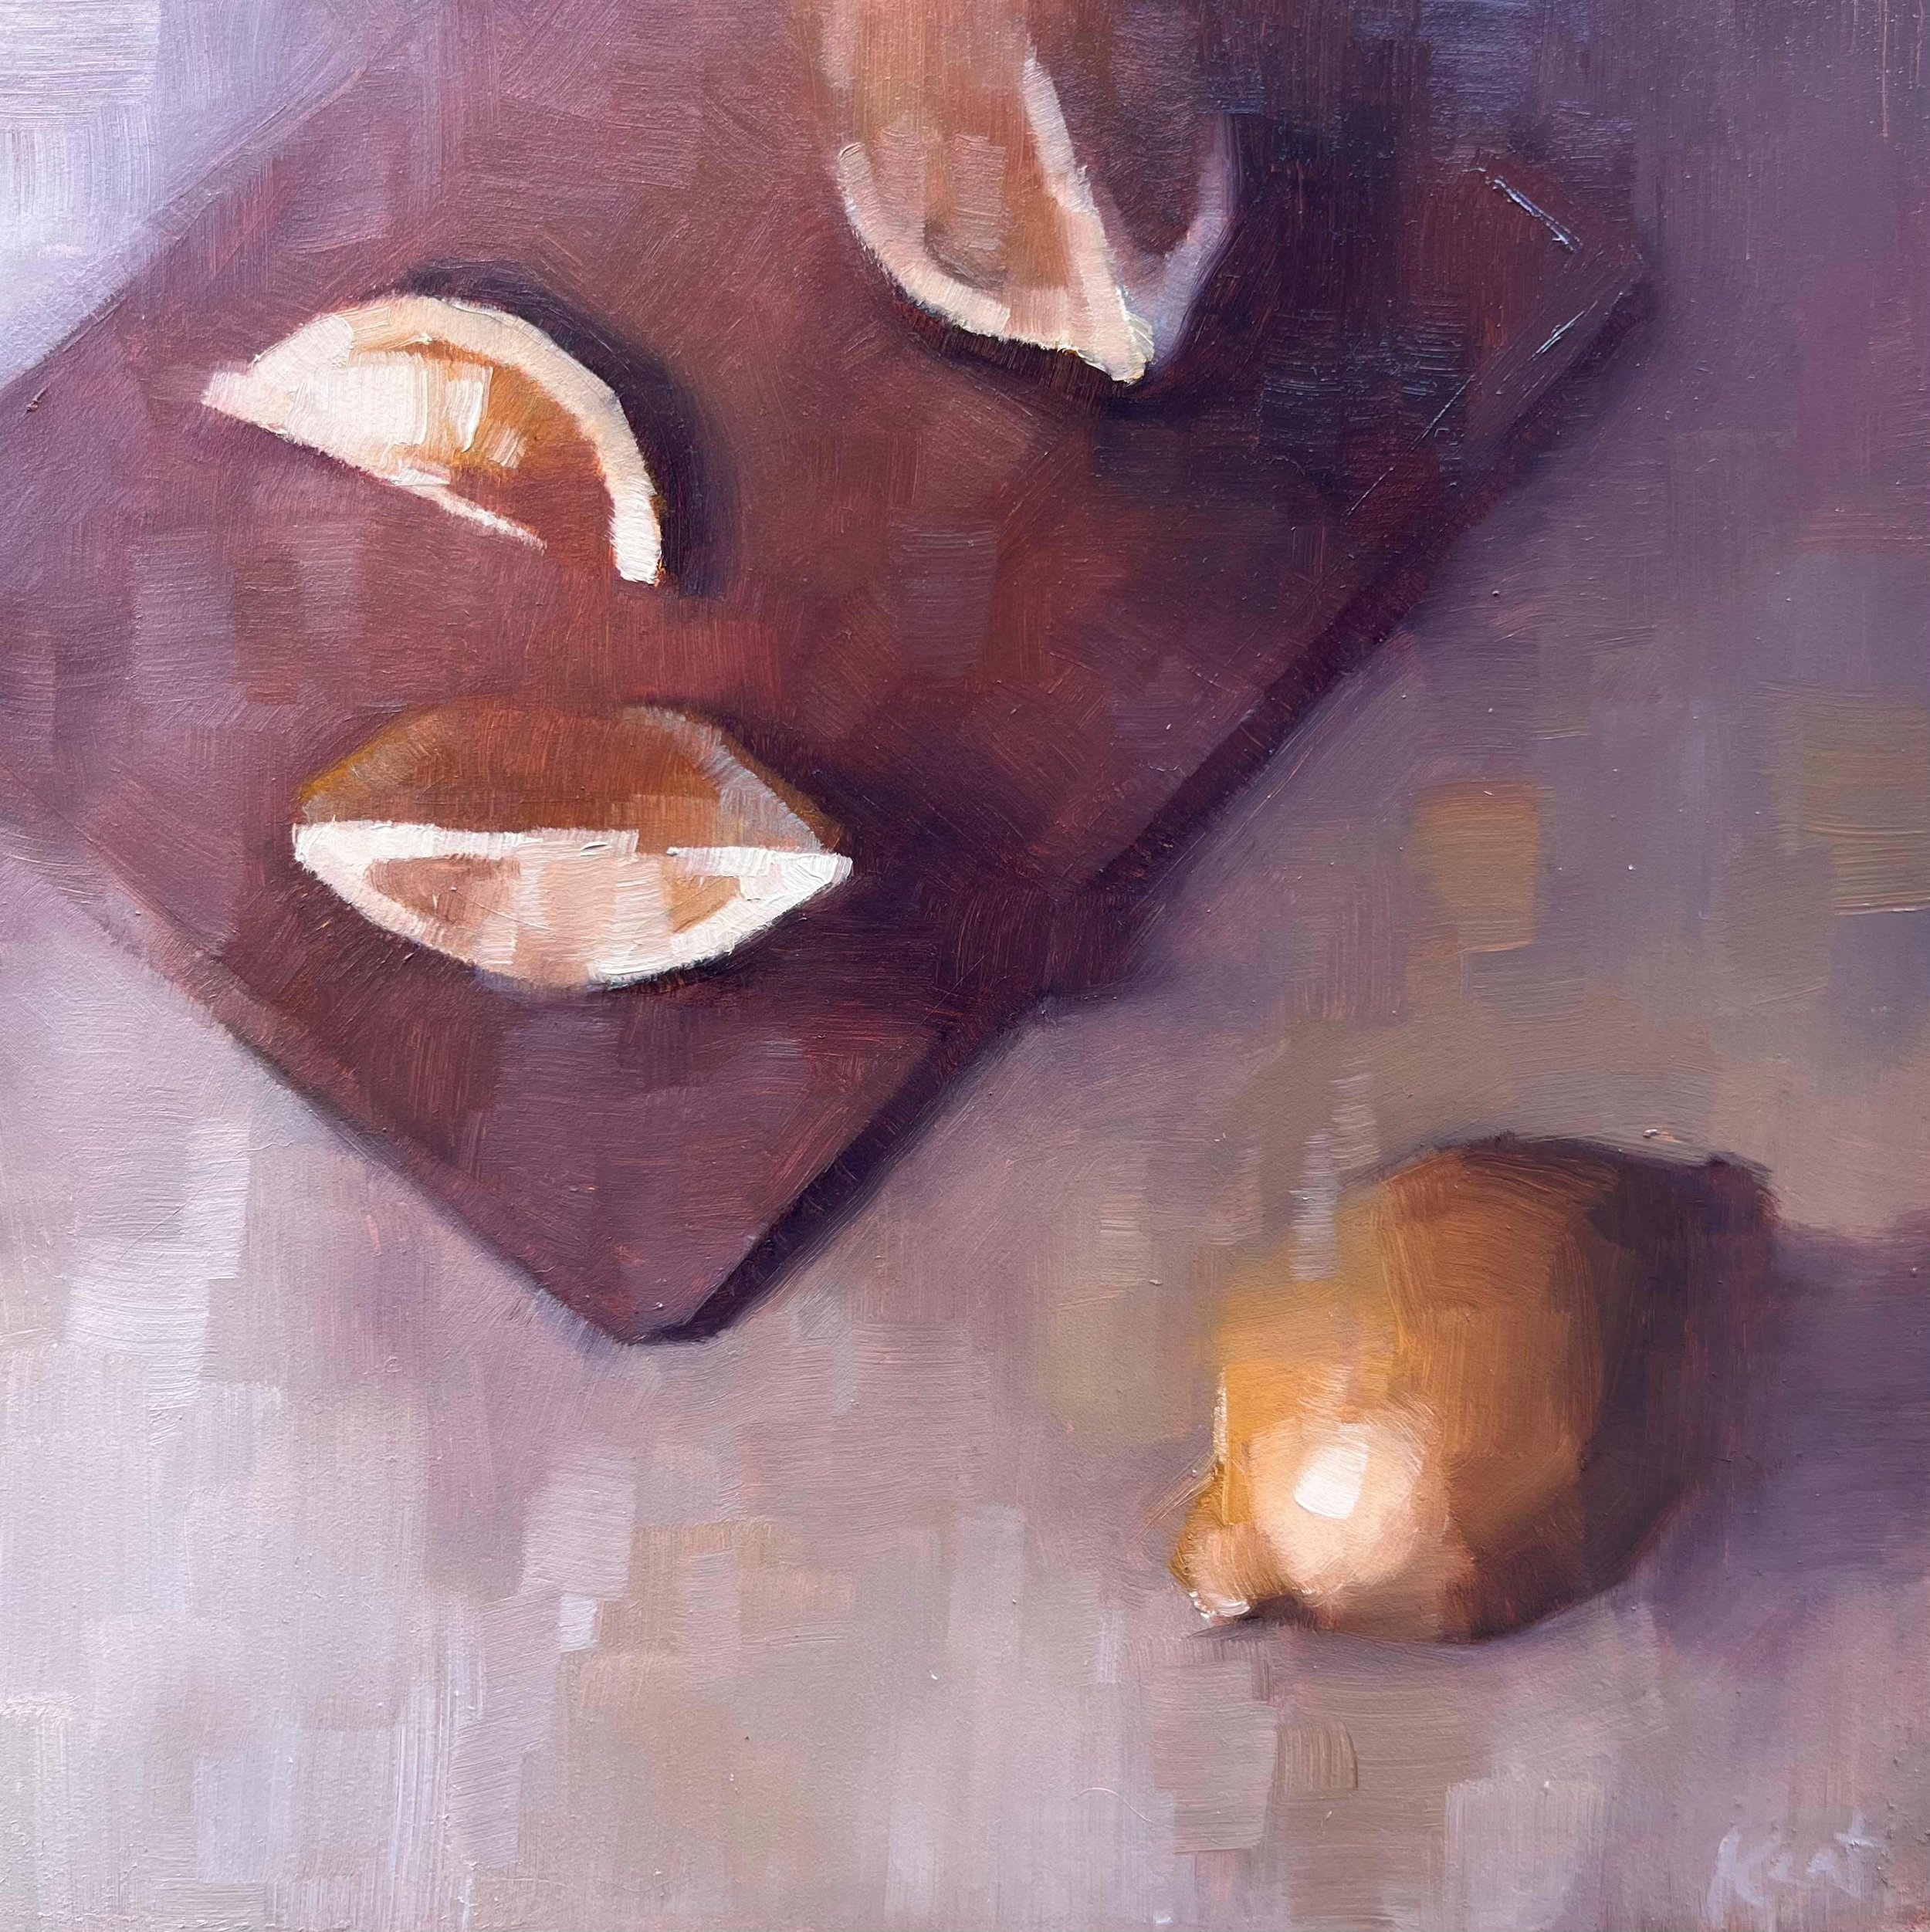 Lemon Study in Complementary Colors by Christina Kent